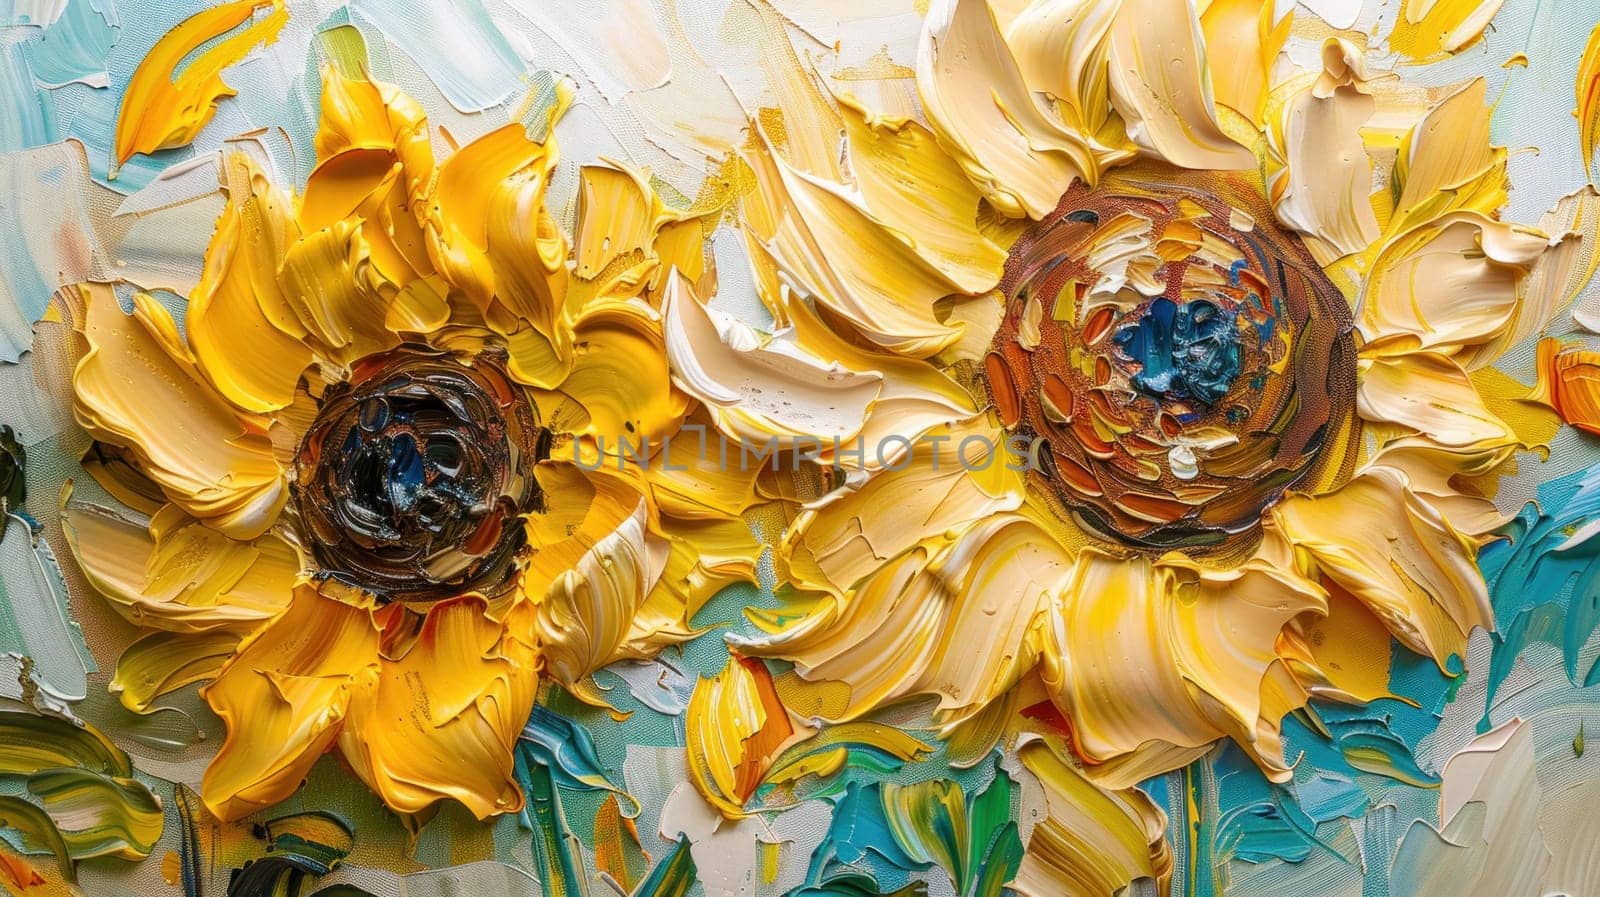 Beautiful sunflowers painting on canvas with blue background nature, art, flower, design, decorative, home, wall decor